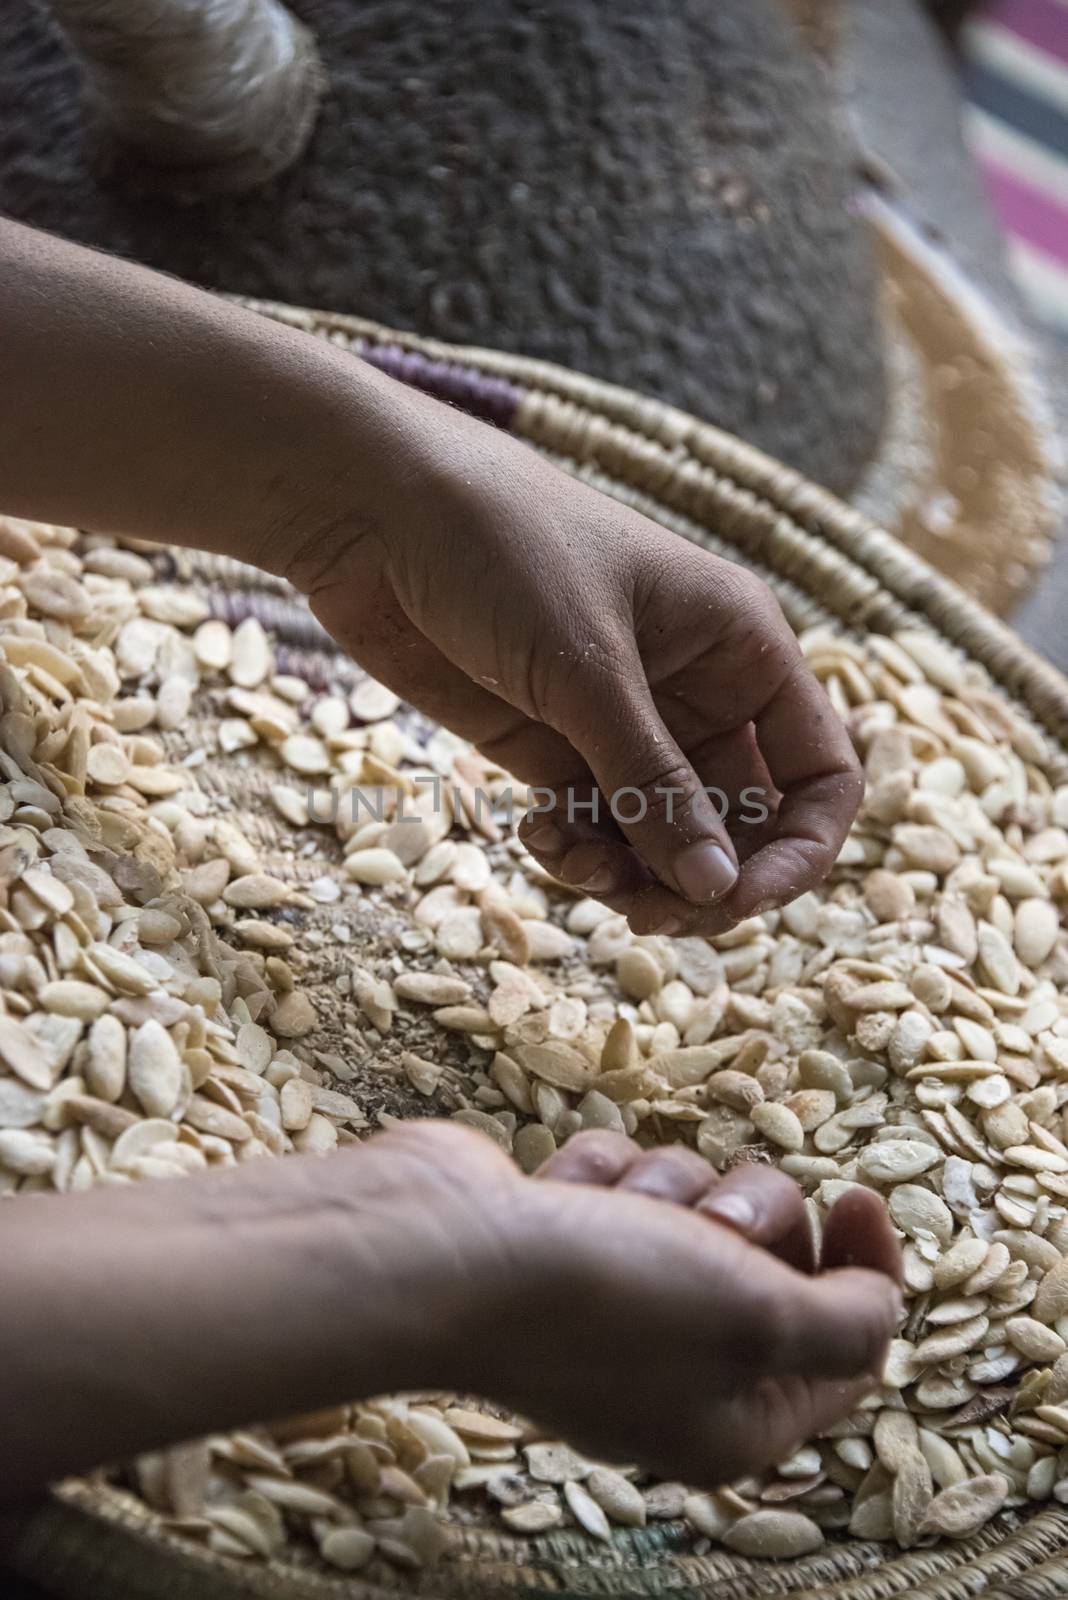 Essaouria, Morocco - September 2017: Lady  hand sorting through Argan nuts being made into oil for food or cosmetic use - close up of hands
